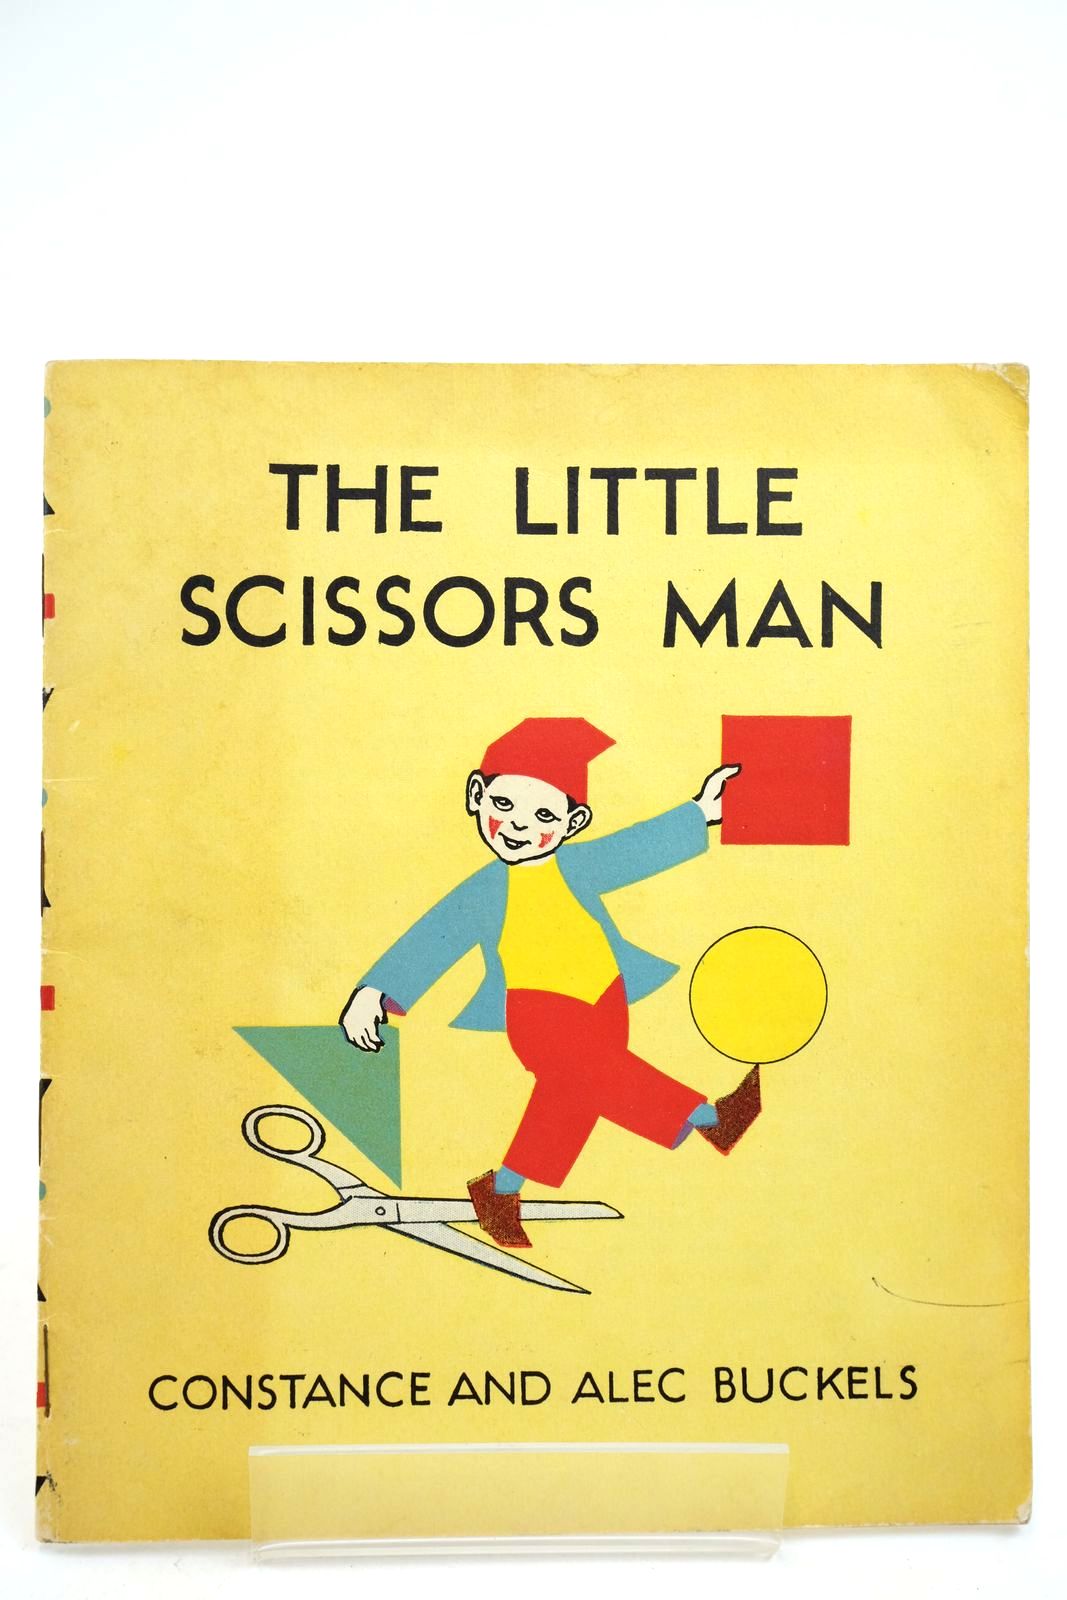 Photo of THE LITTLE SCISSORS MAN written by Buckels, Alec Buckels, Constance published by Jarrold and Sons Limited (STOCK CODE: 2139966)  for sale by Stella & Rose's Books